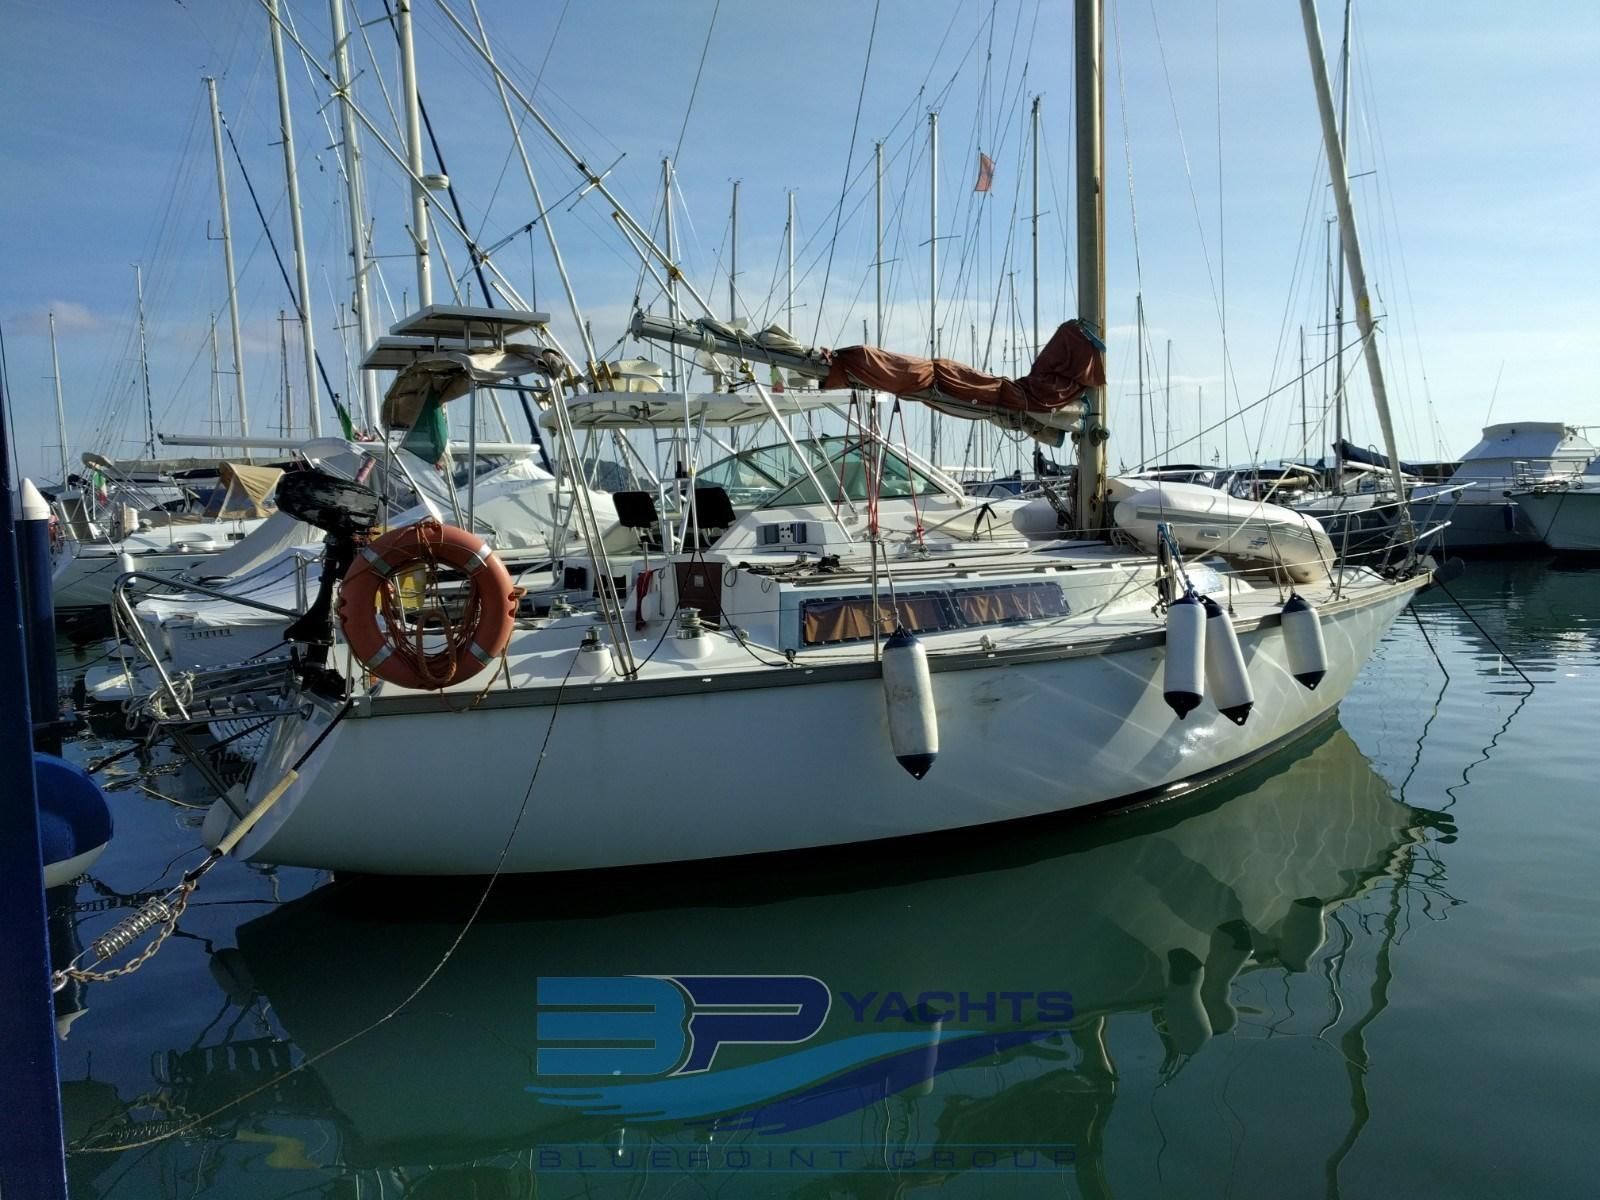 dufour sailboat for sale ontario